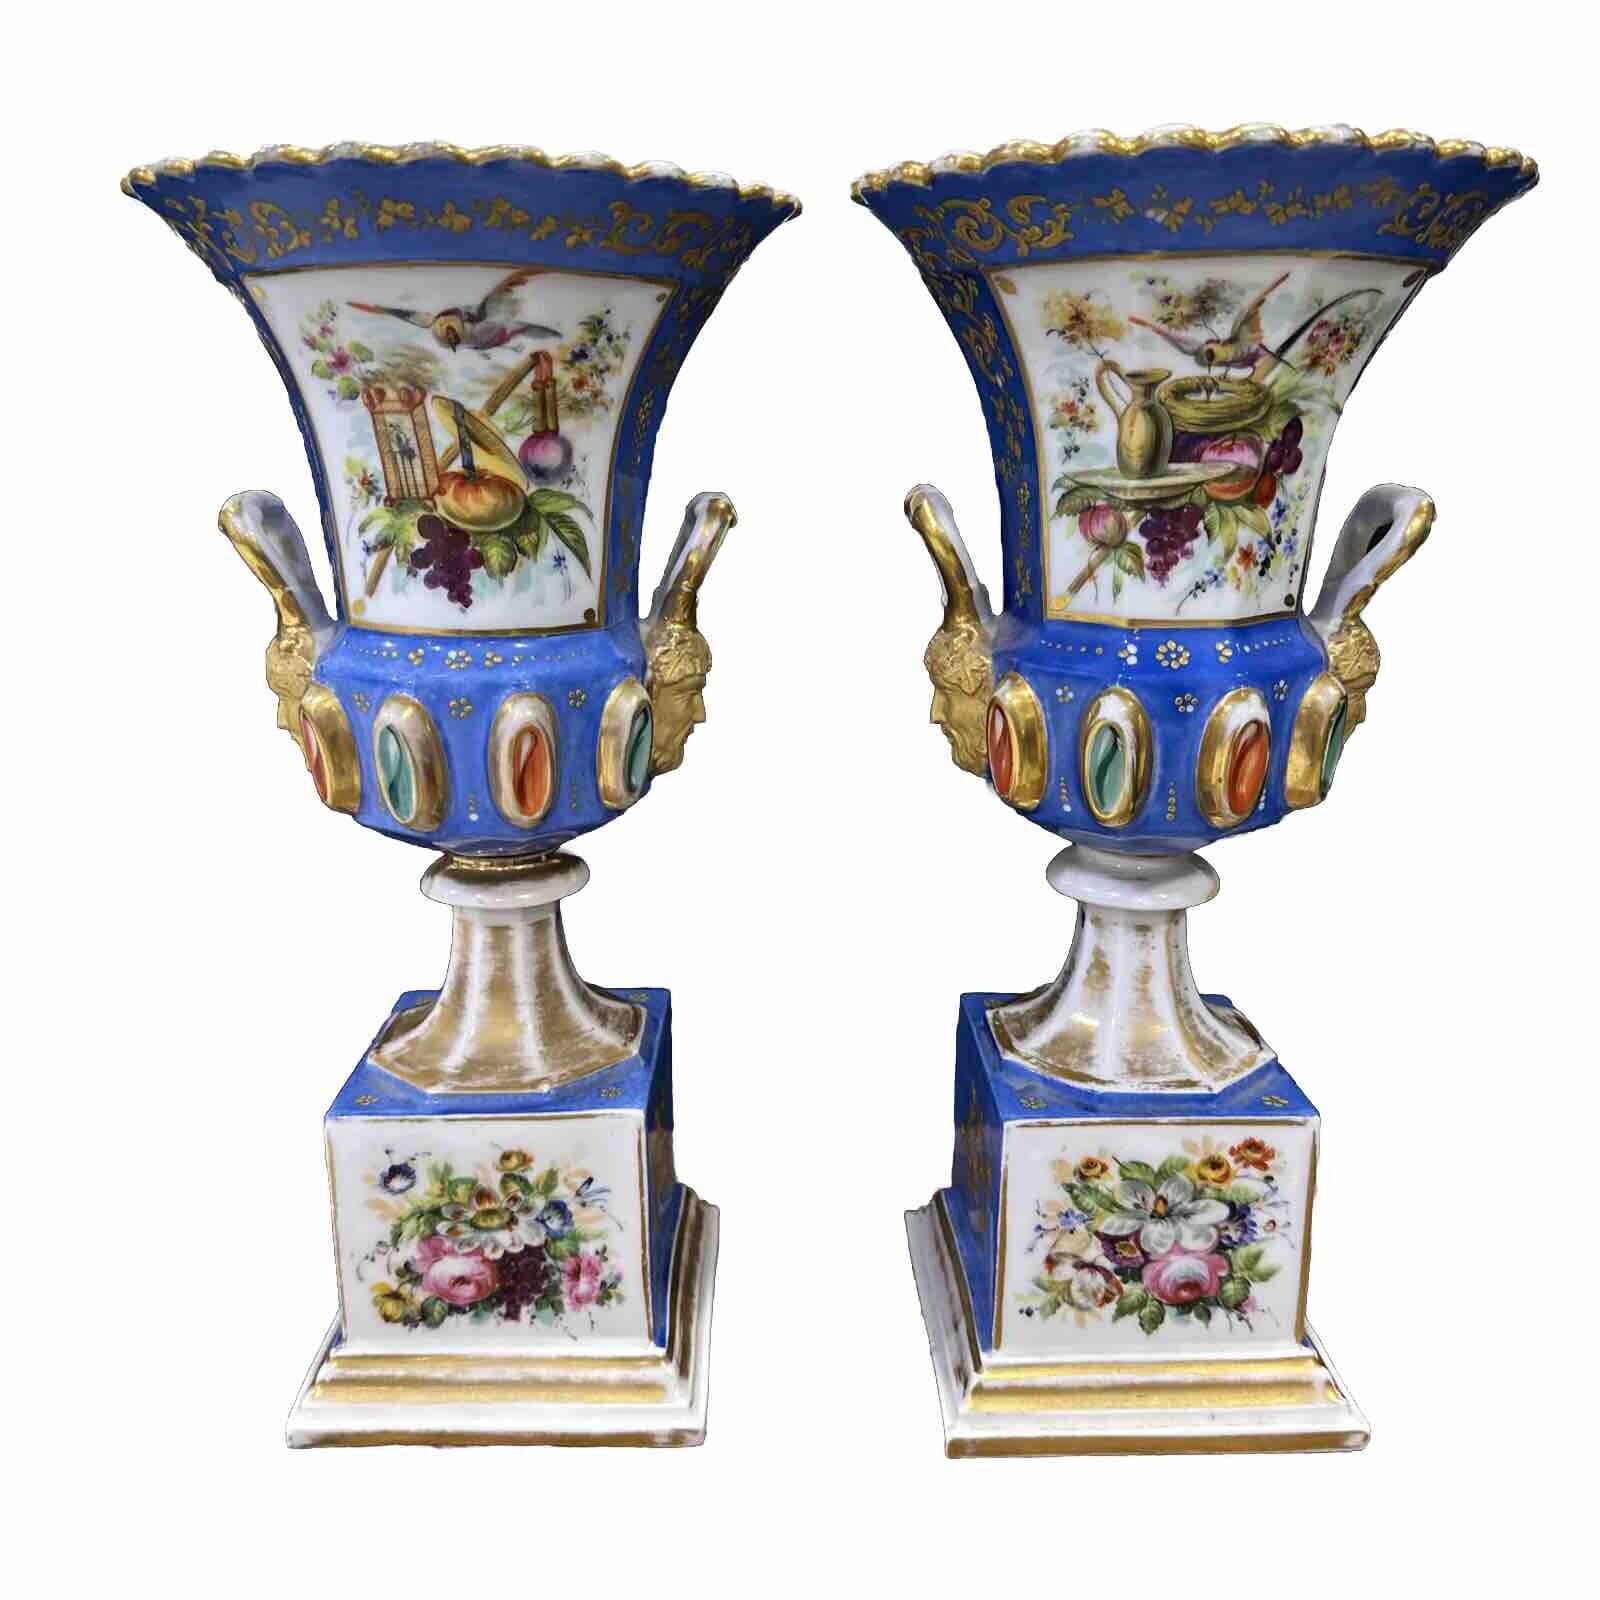 Pair of Antique Imperial Russian Porcelain Vases by Popov 19th Century